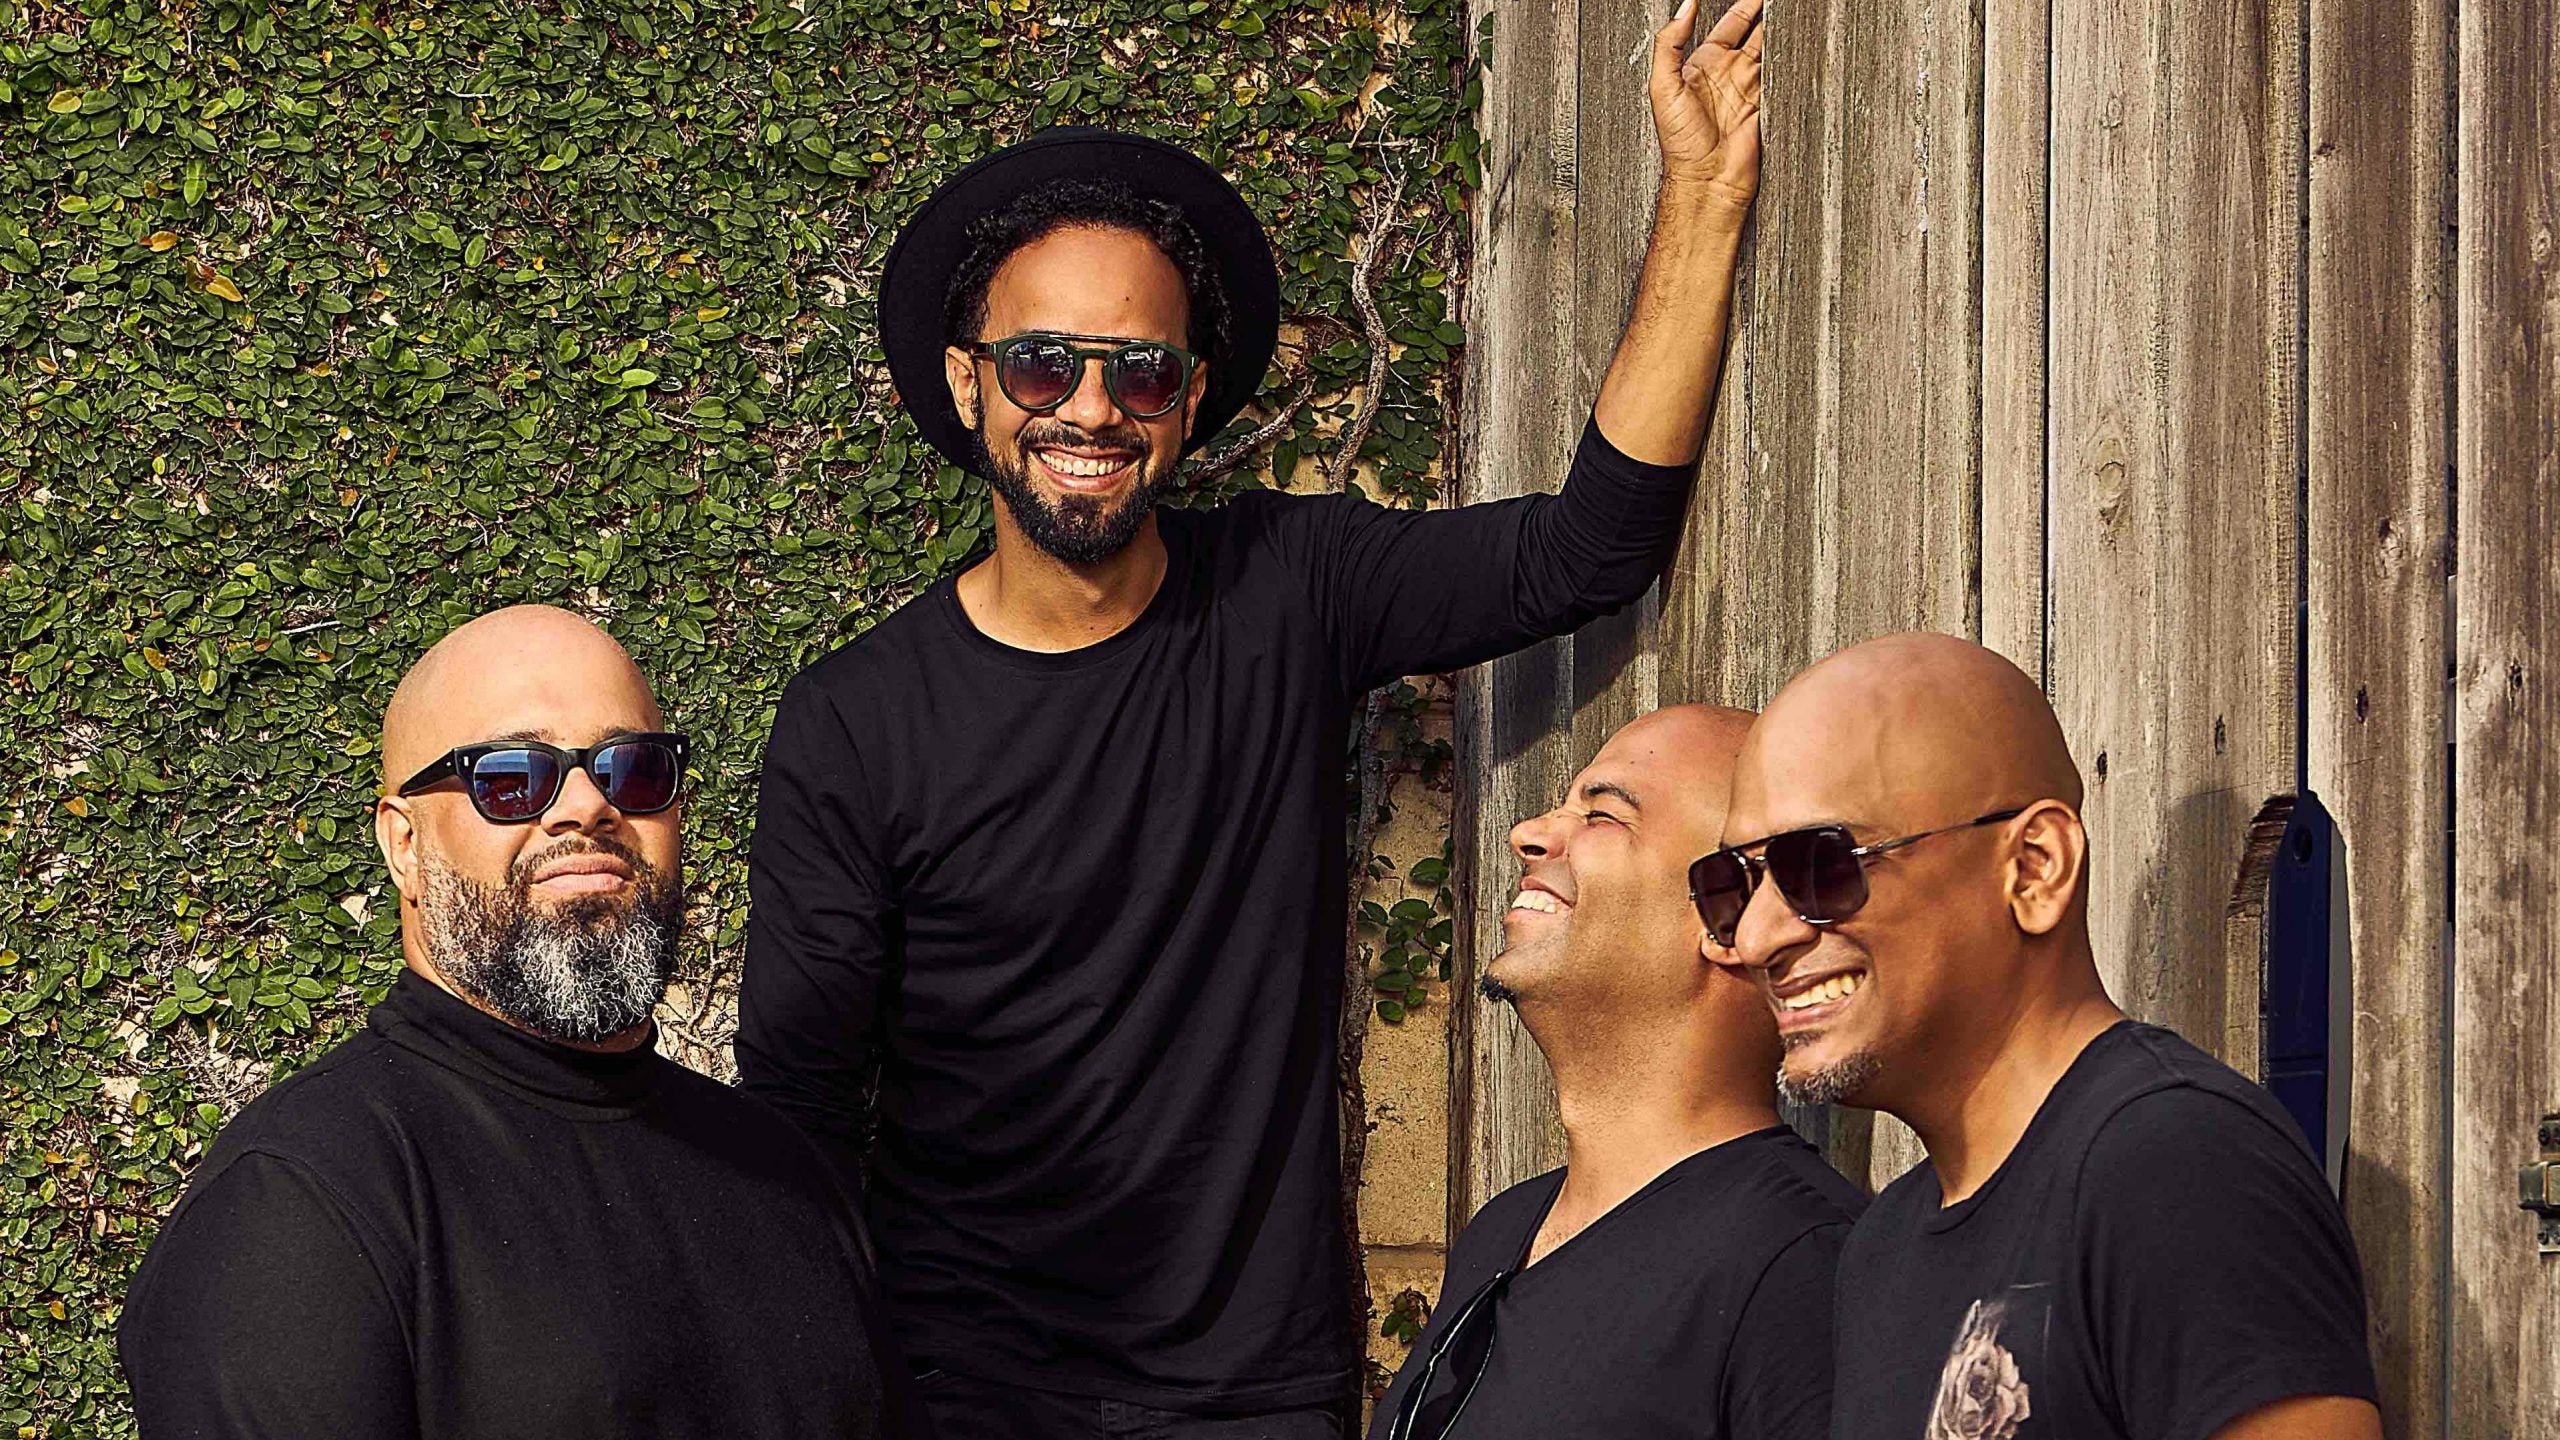 Soca Artists Kes The Band Is Back With New Live Album Just In Time For Labor Day Weekend